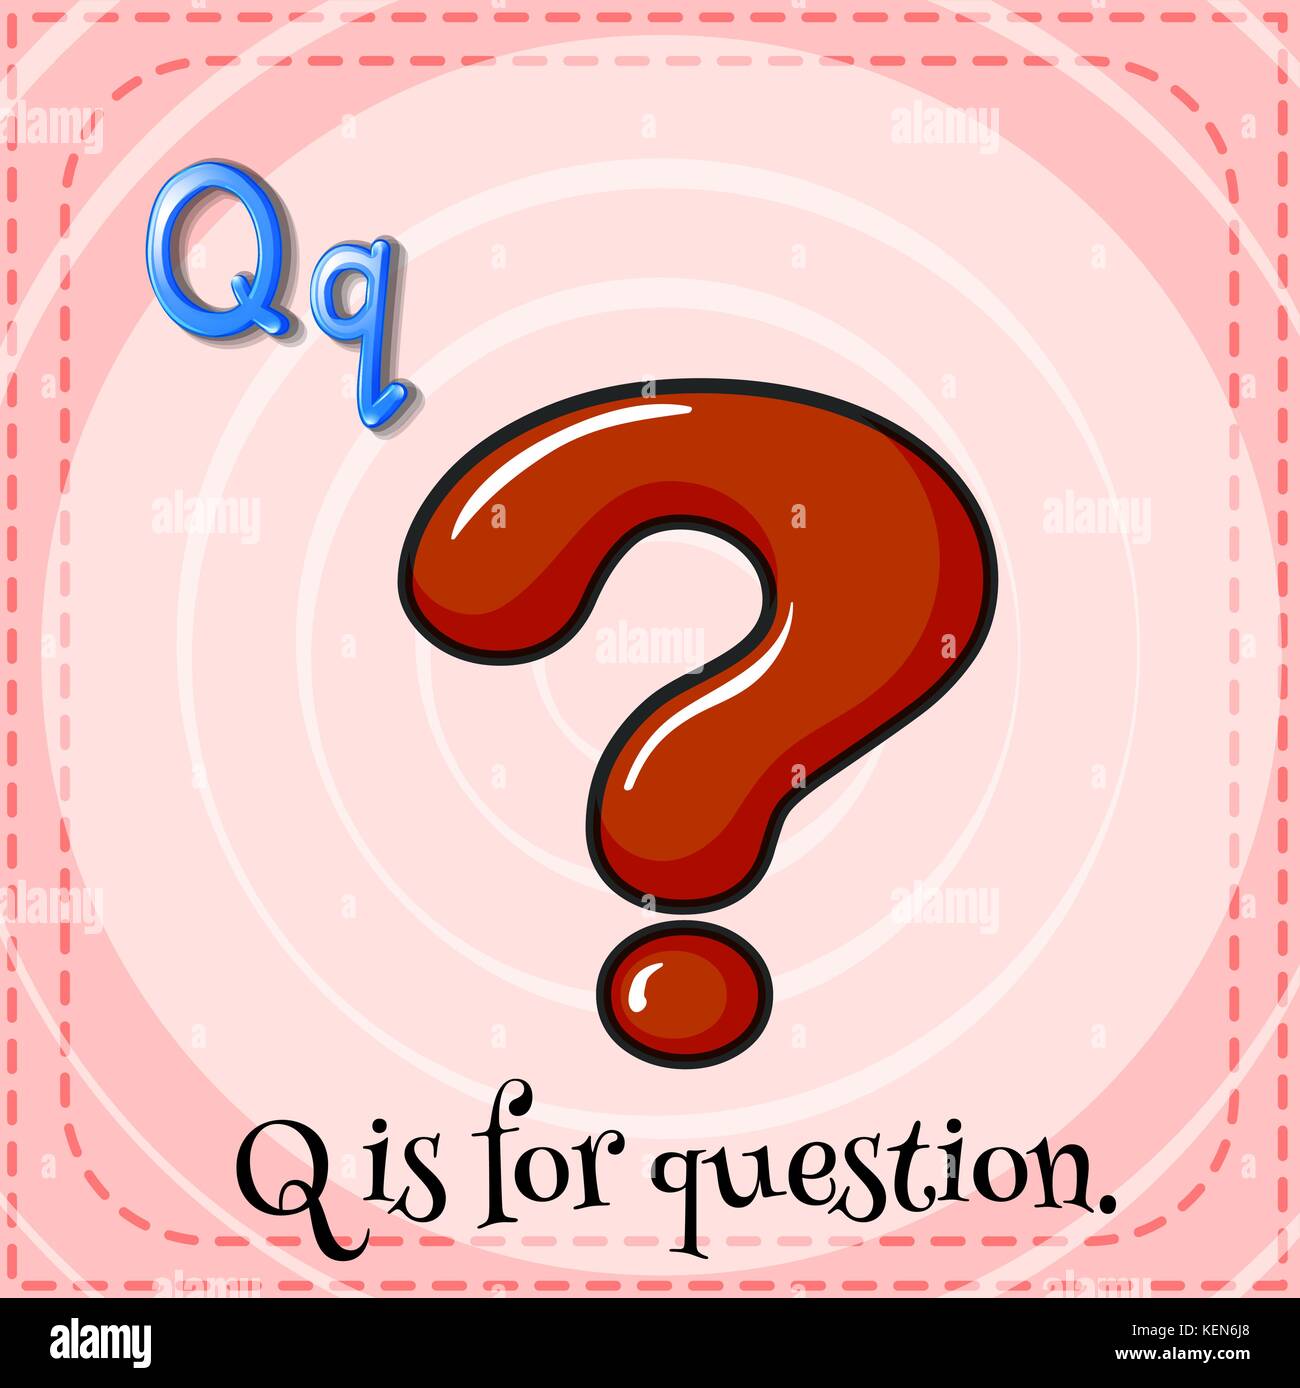 Q question. Q is for question. Буква q знак вопроса. Letter q question. Q and a questions.